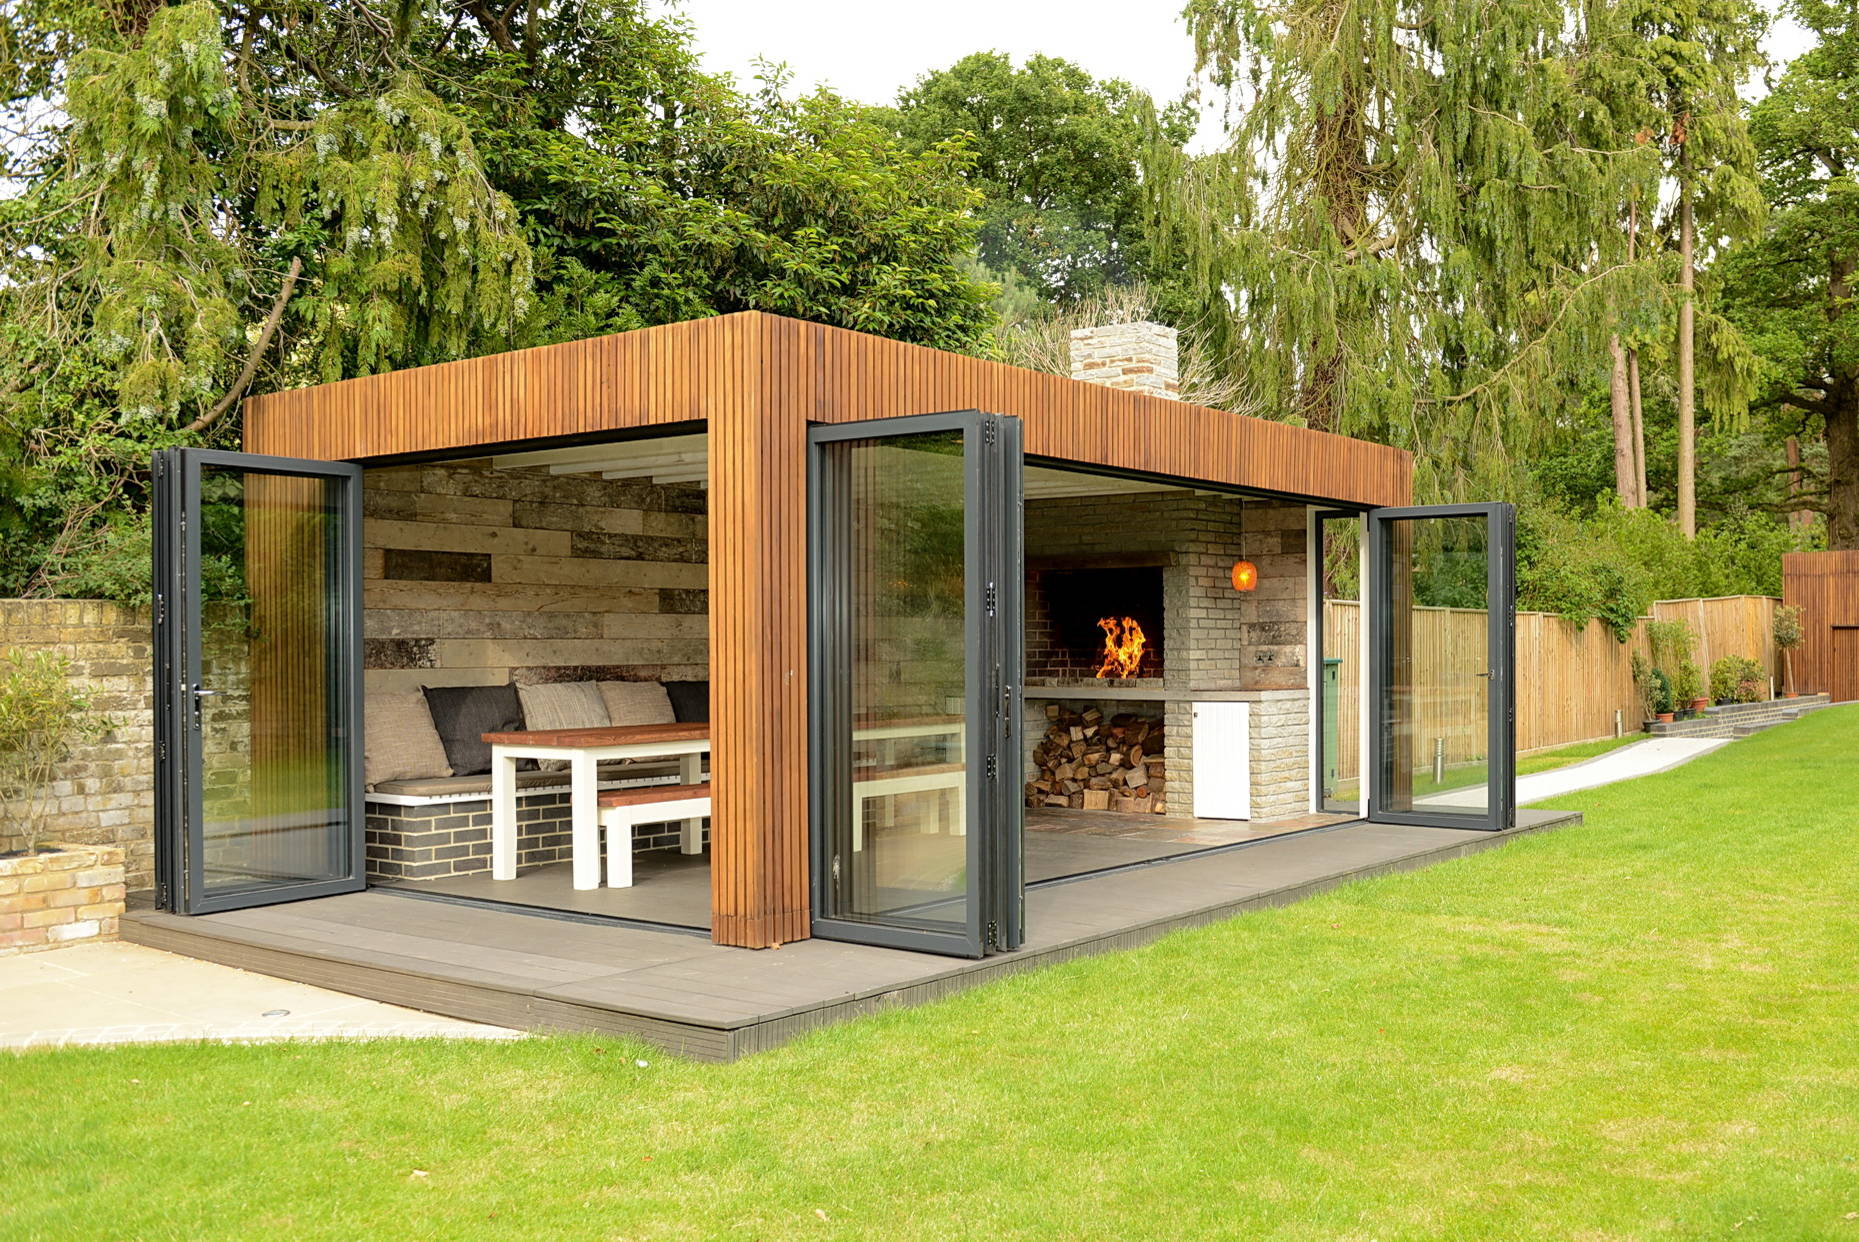 75 Beautiful Shed Pictures Ideas December 2020 Houzz